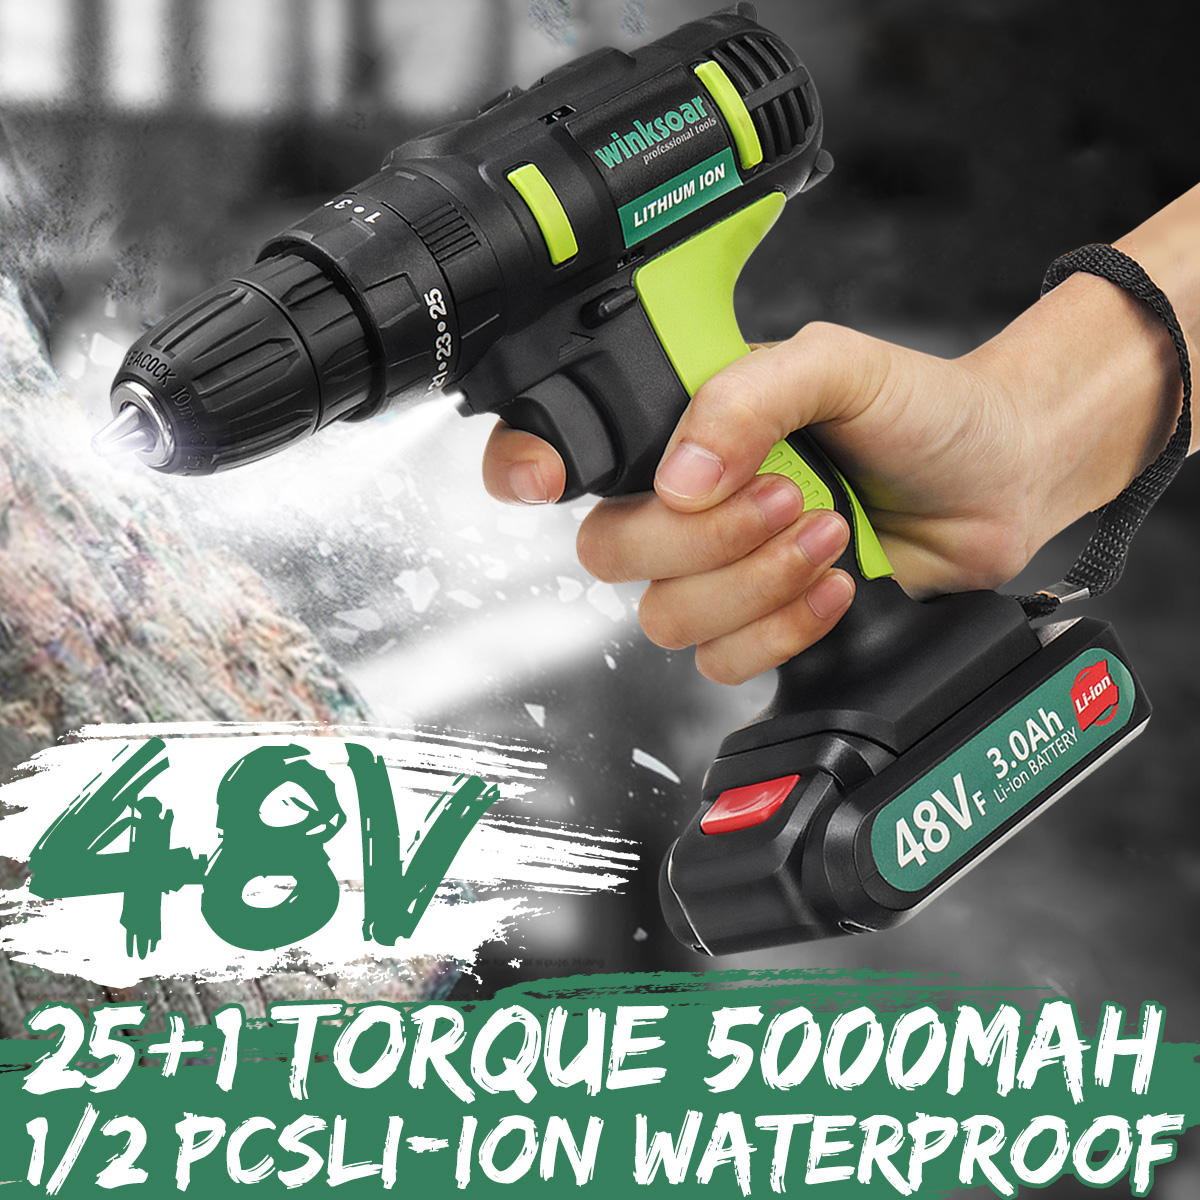 48VF-3-in-1-251-Gears-Electric-Impact-Drill-2-Speeds-Rechargeable-Screwdriver-W-LED-Light-1733392-1